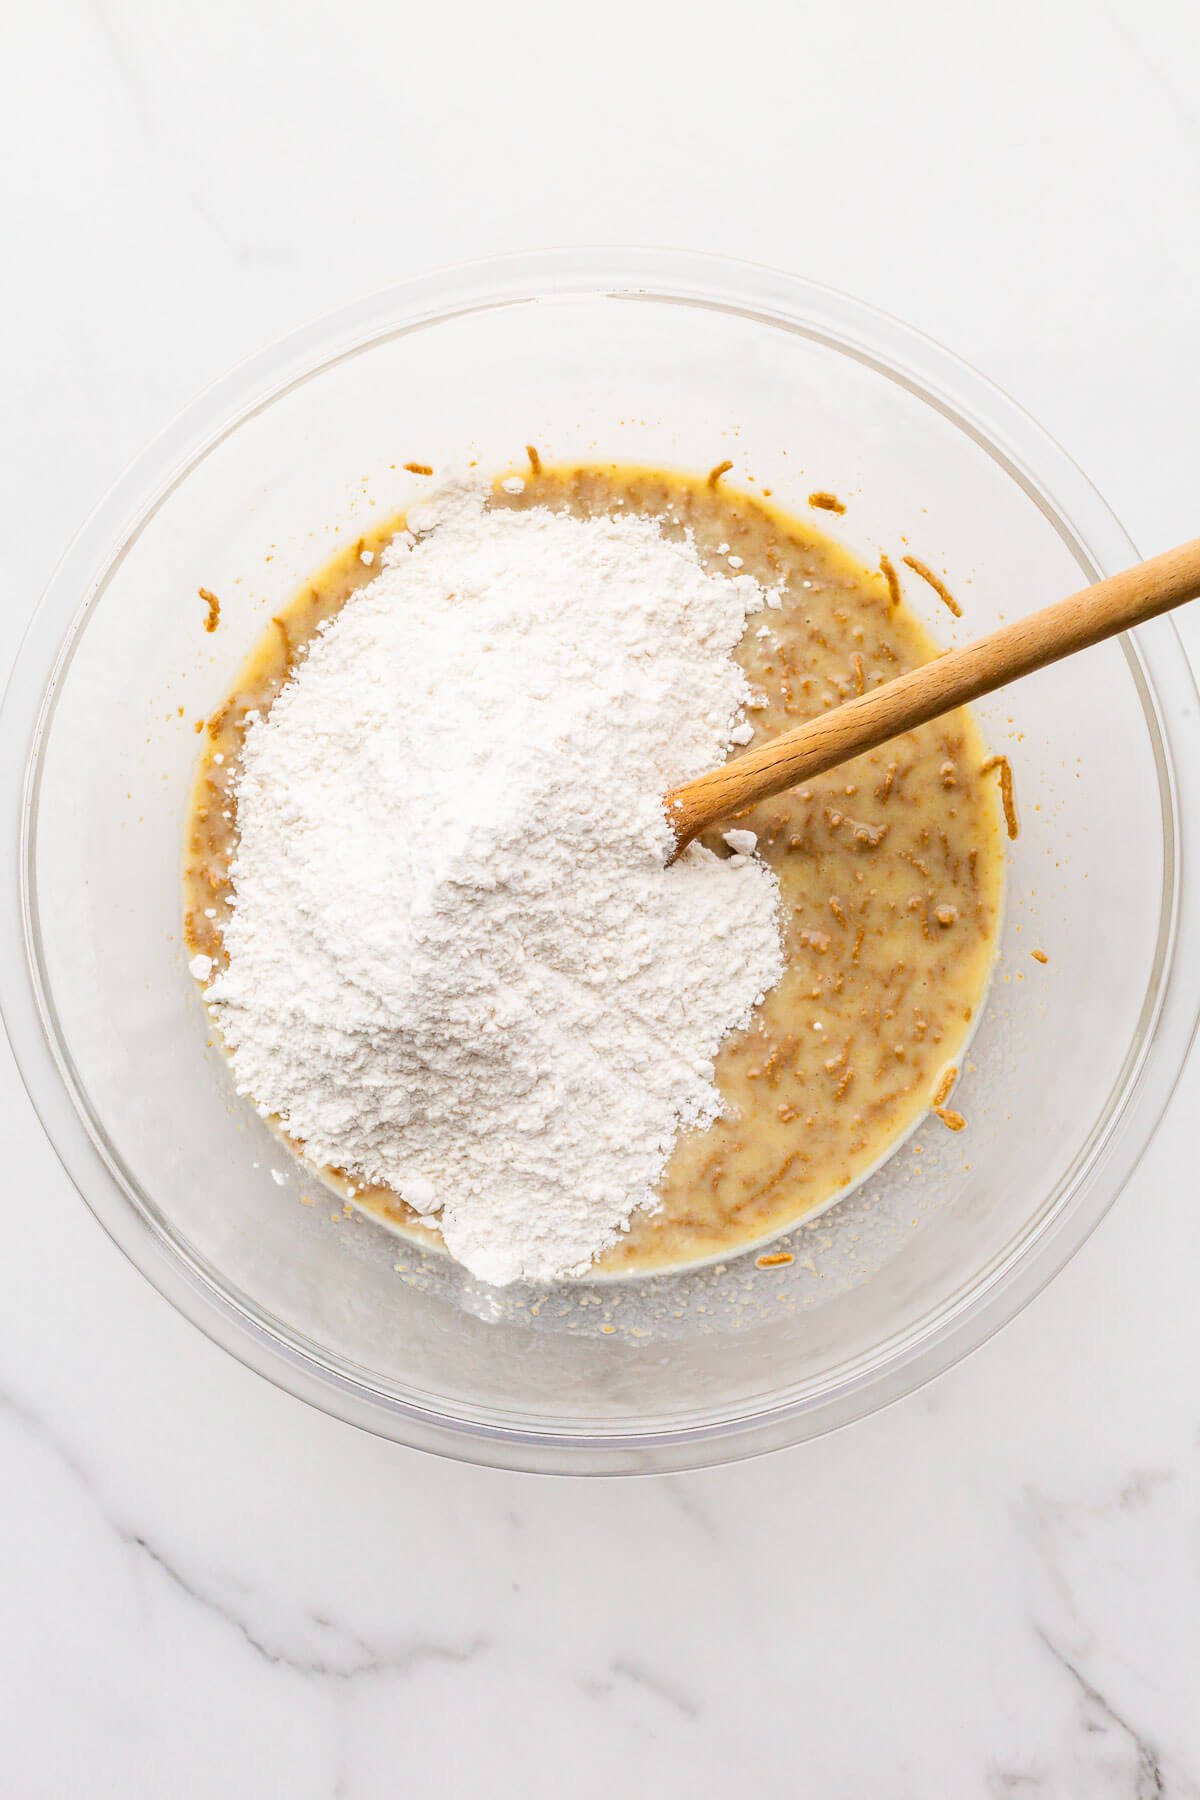 Stirring flour into bran muffin batter in a glass bowl with a wooden spoon.